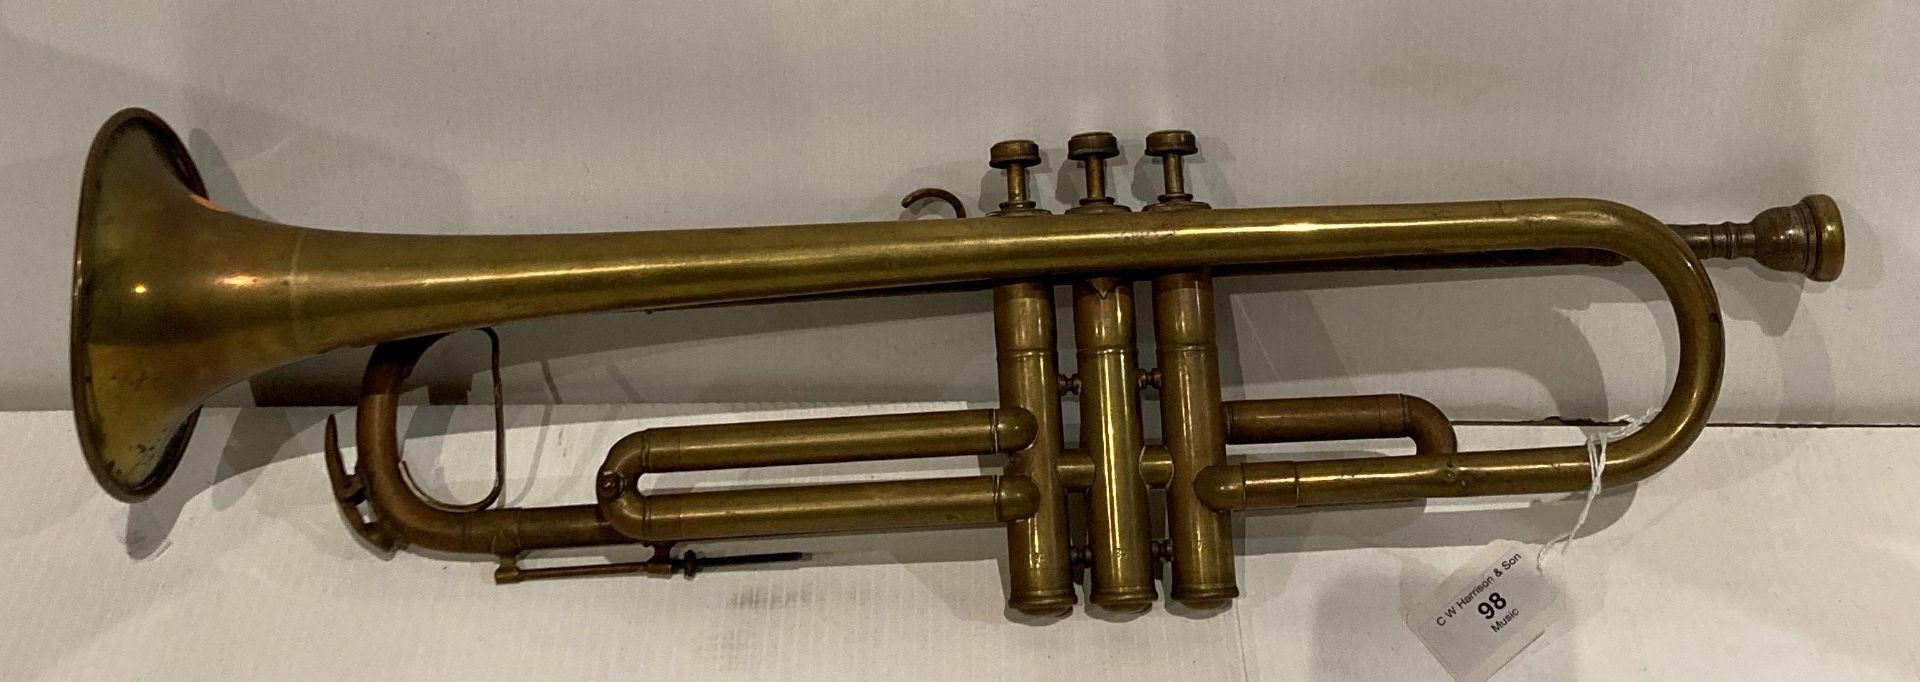 Brass trumpet (no name) the only markings are LP and notes 79, 80,